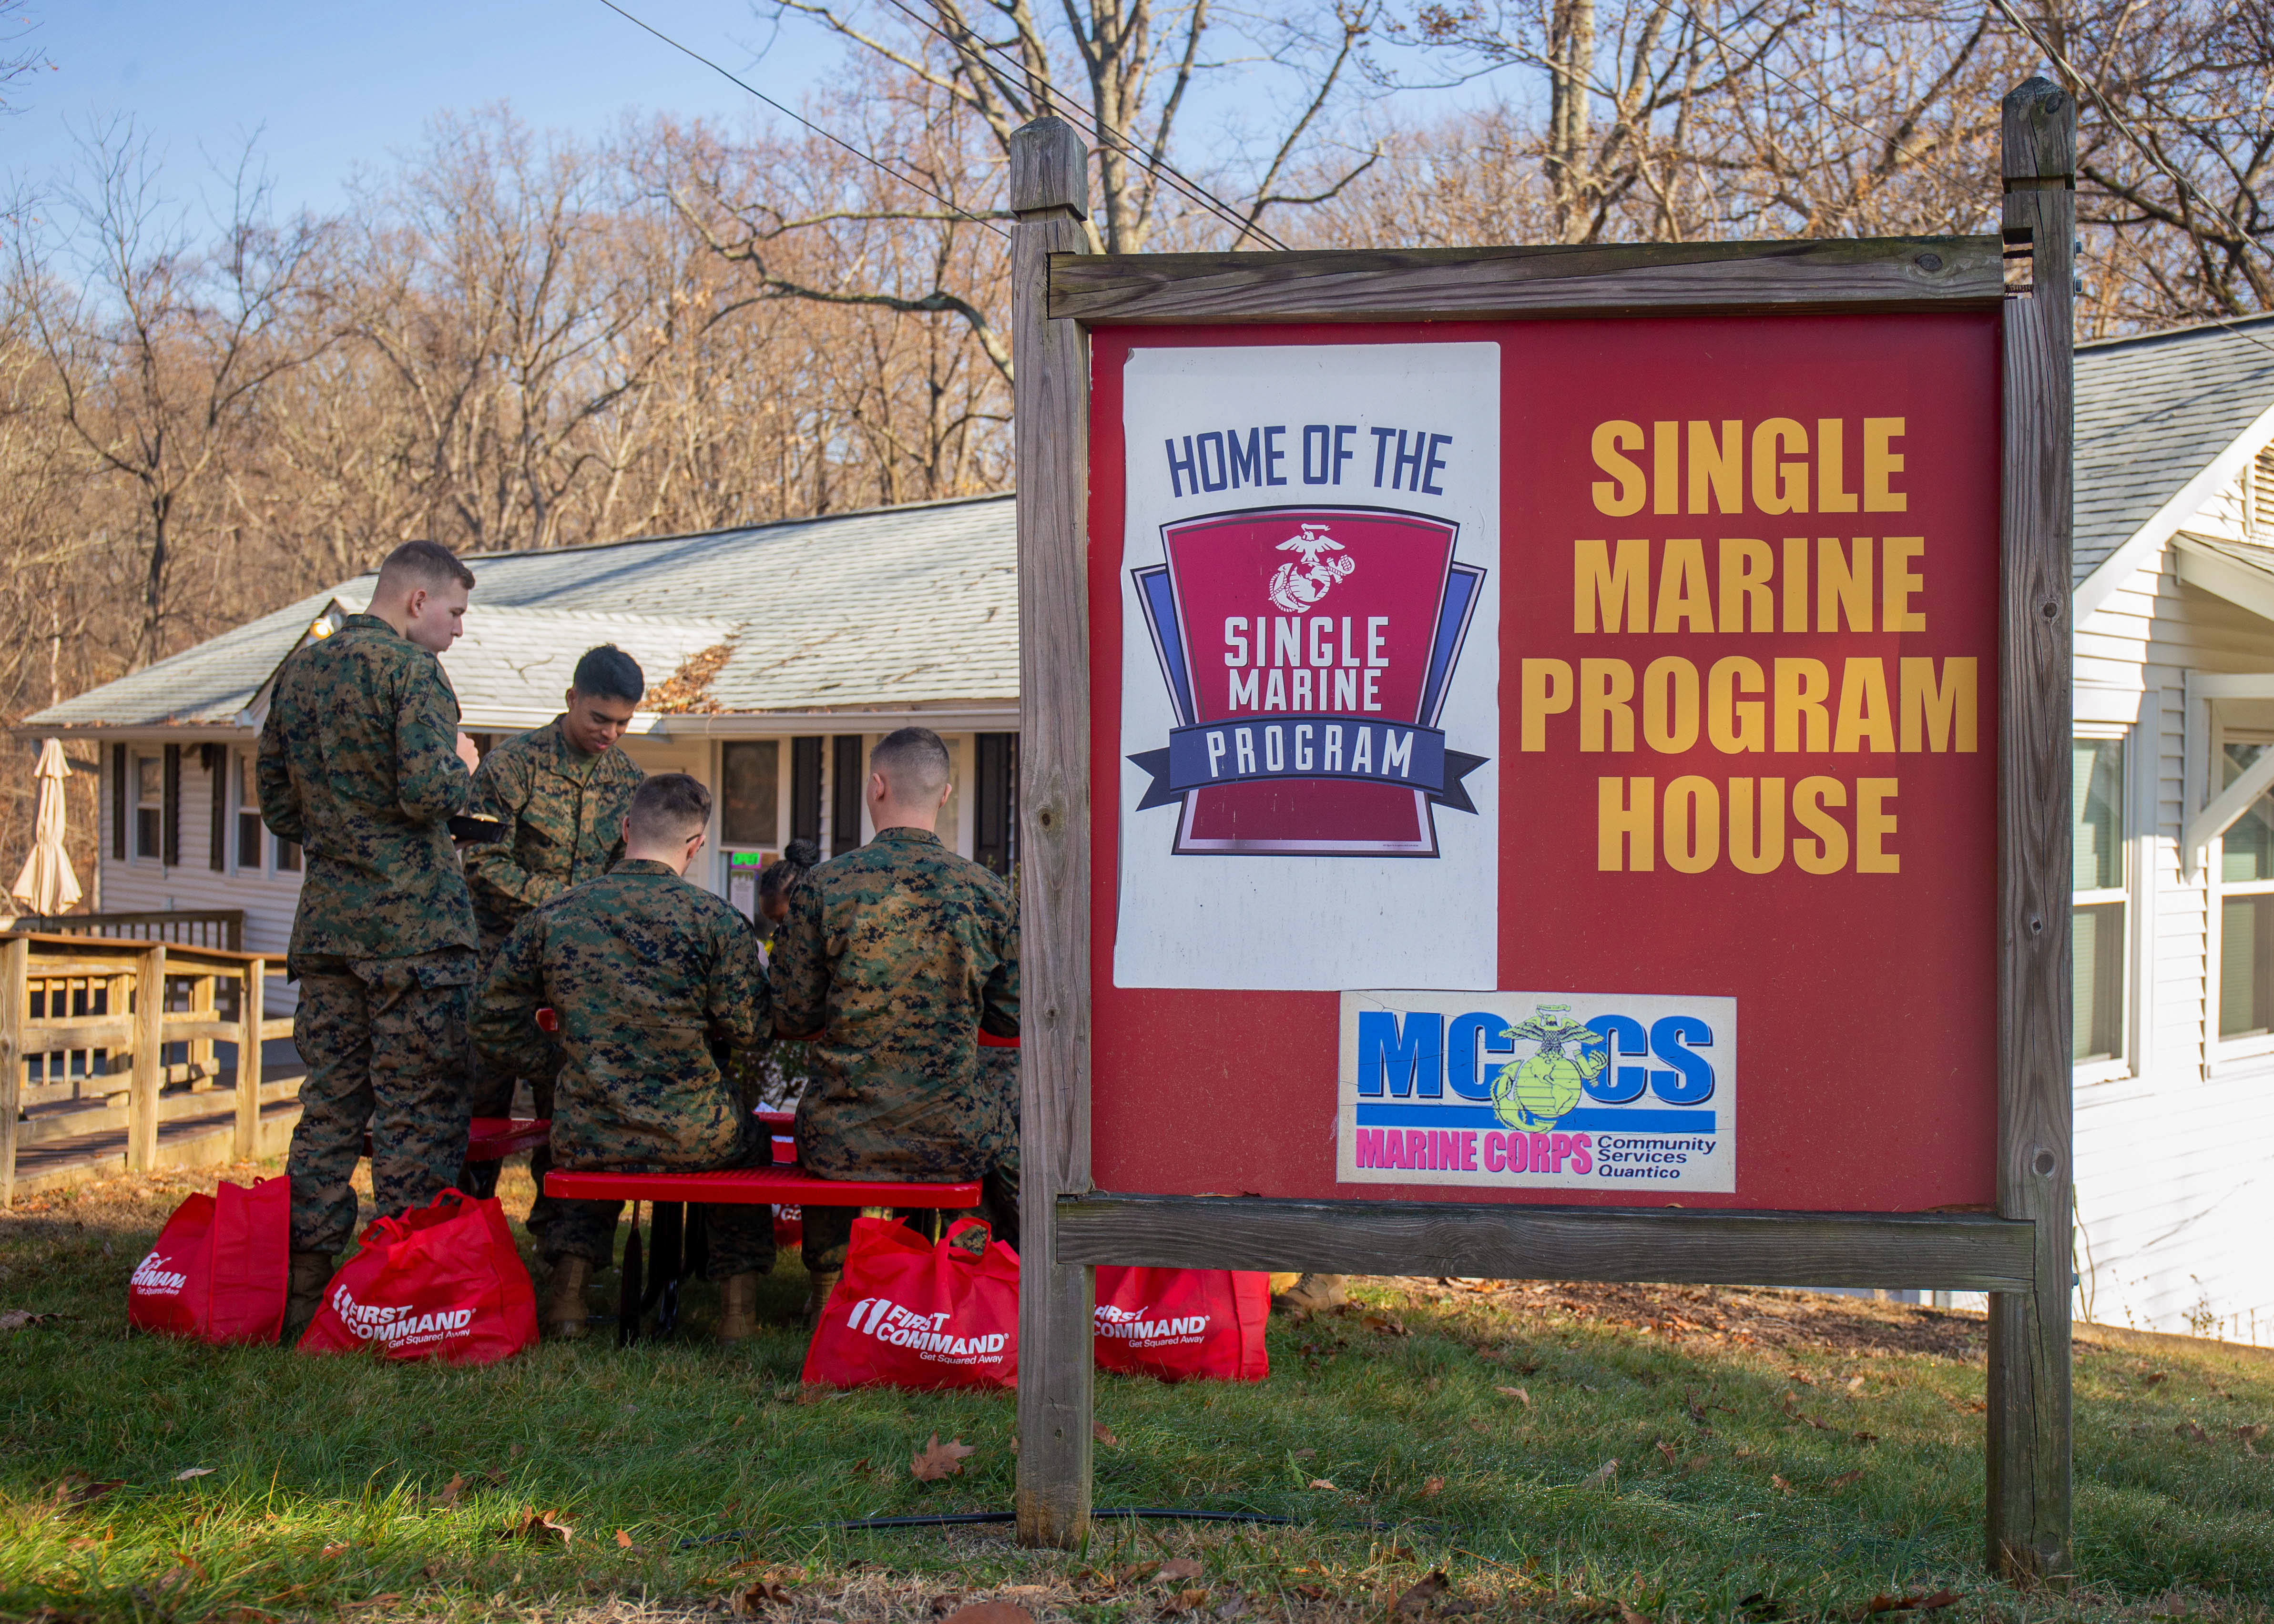 A small group of Marines sitting at a picnic table eating next to a red sign.